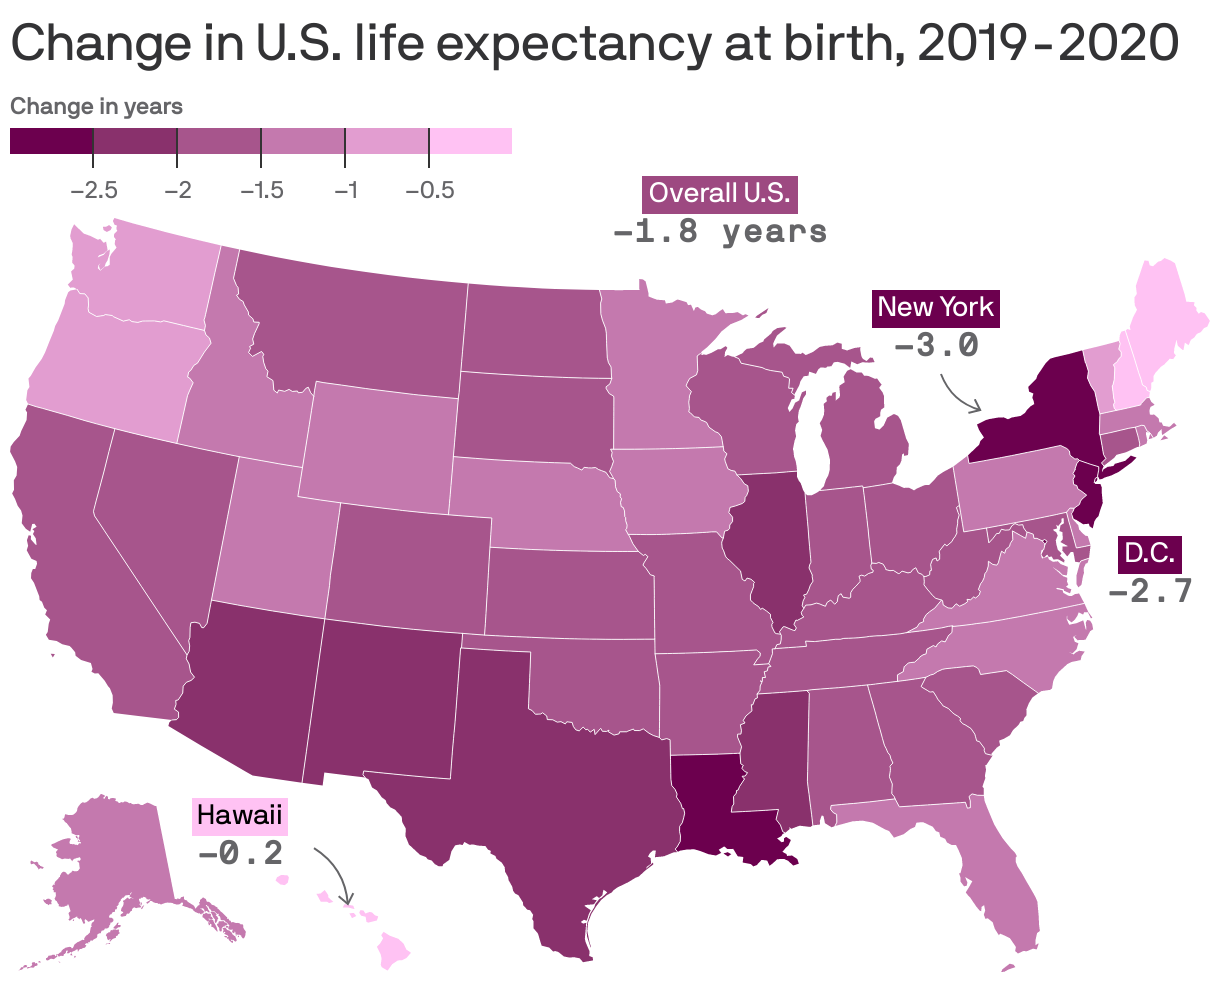 Change in U.S. life expectancy at birth, 2019-2020